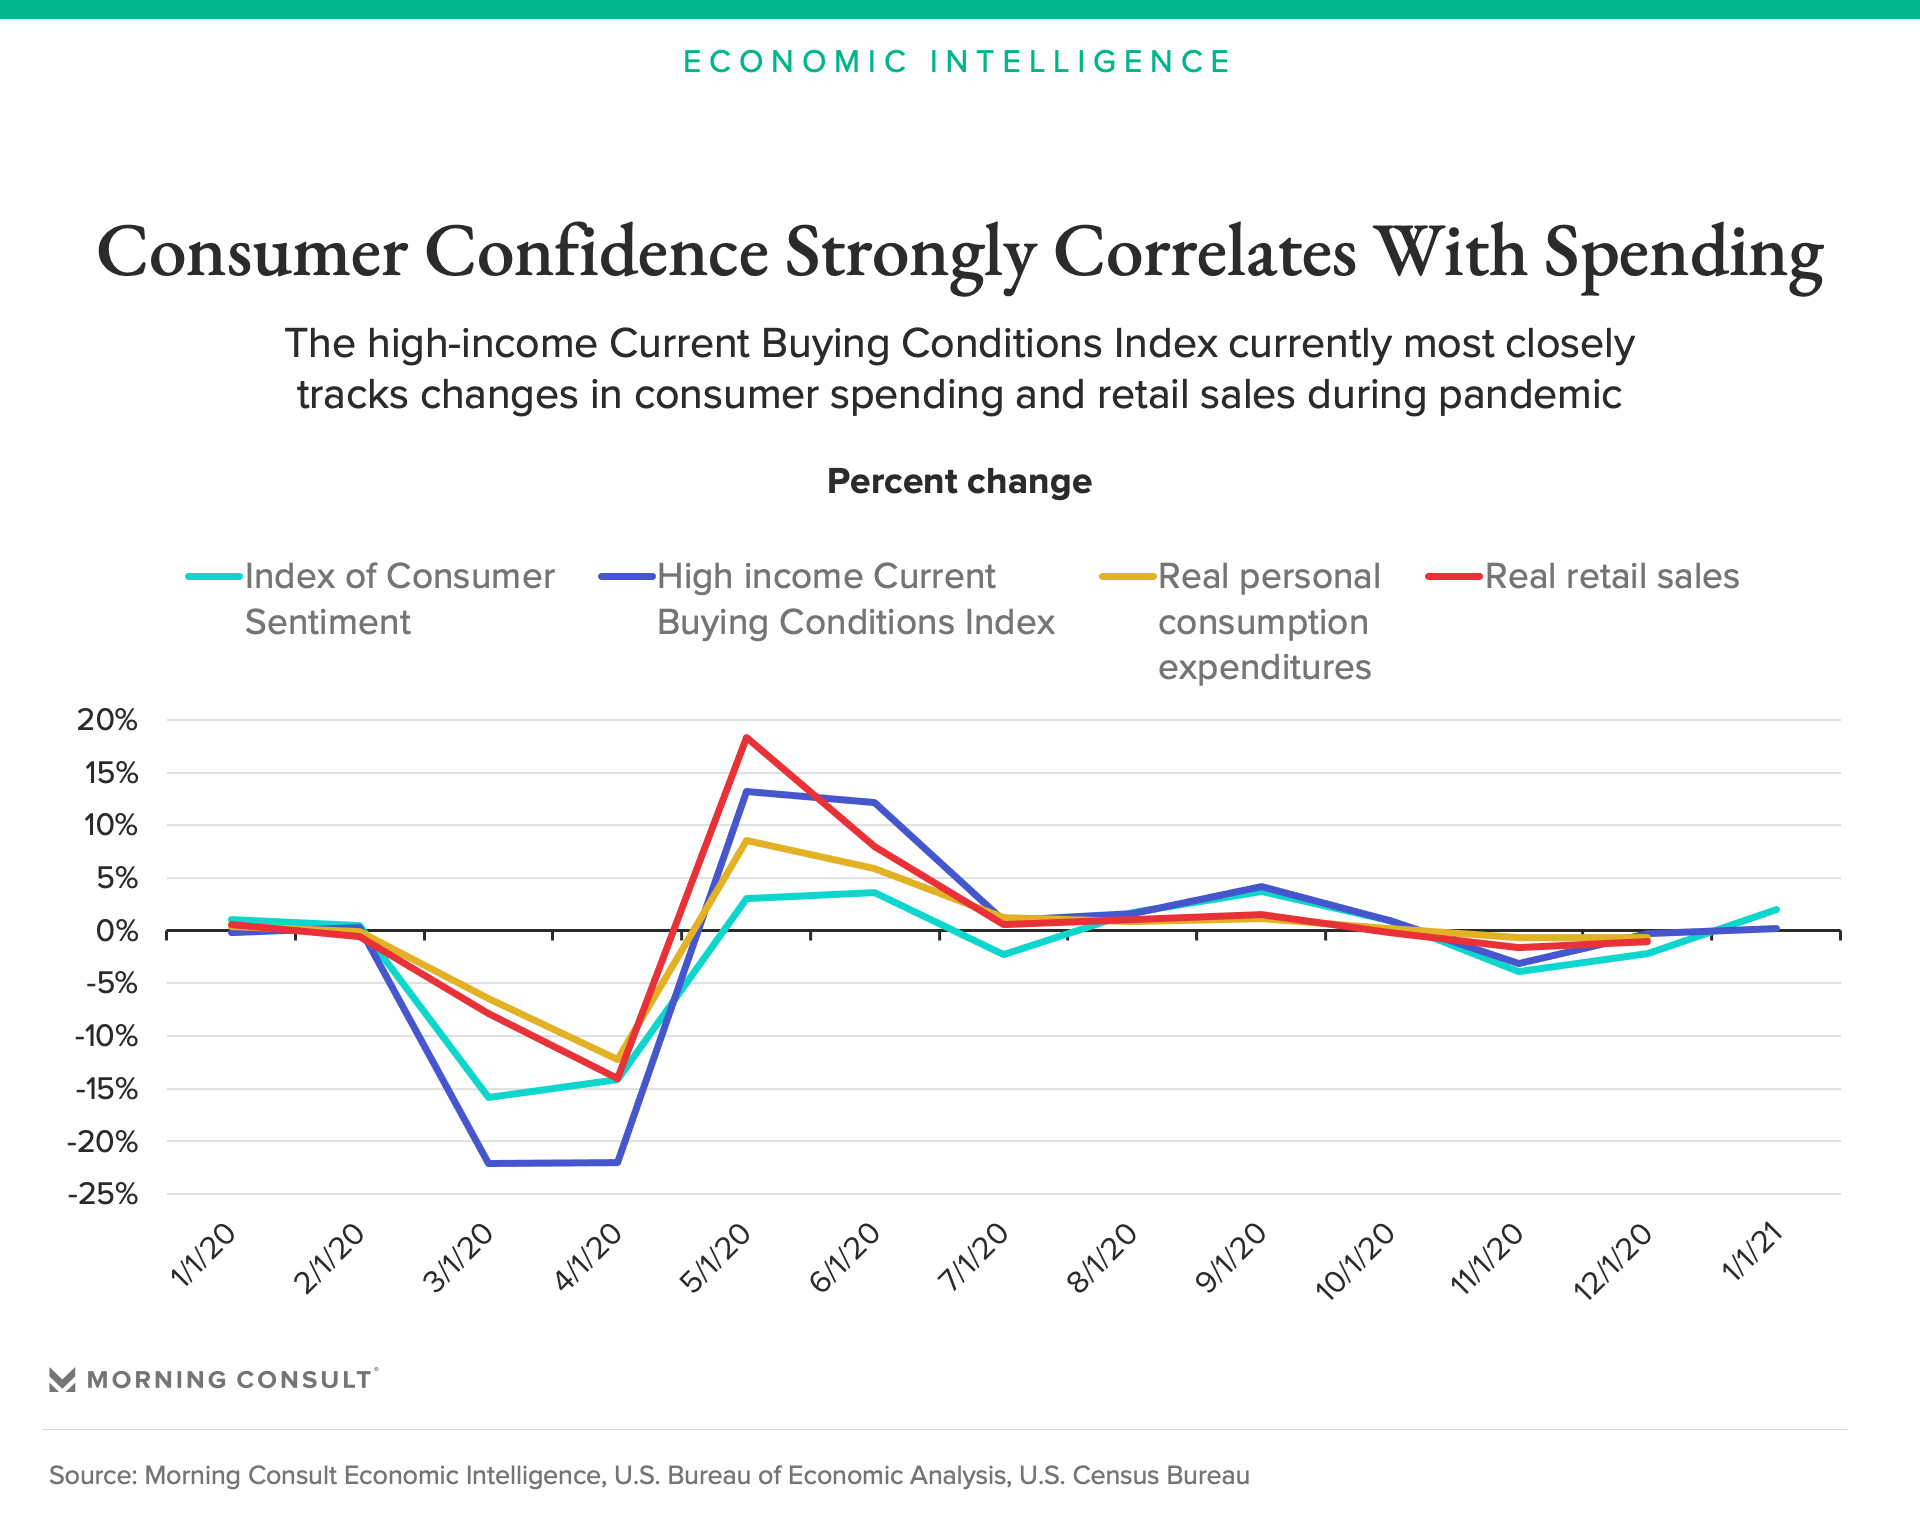 To See What’s Next For Consumer Spending, Take a Closer Look at High